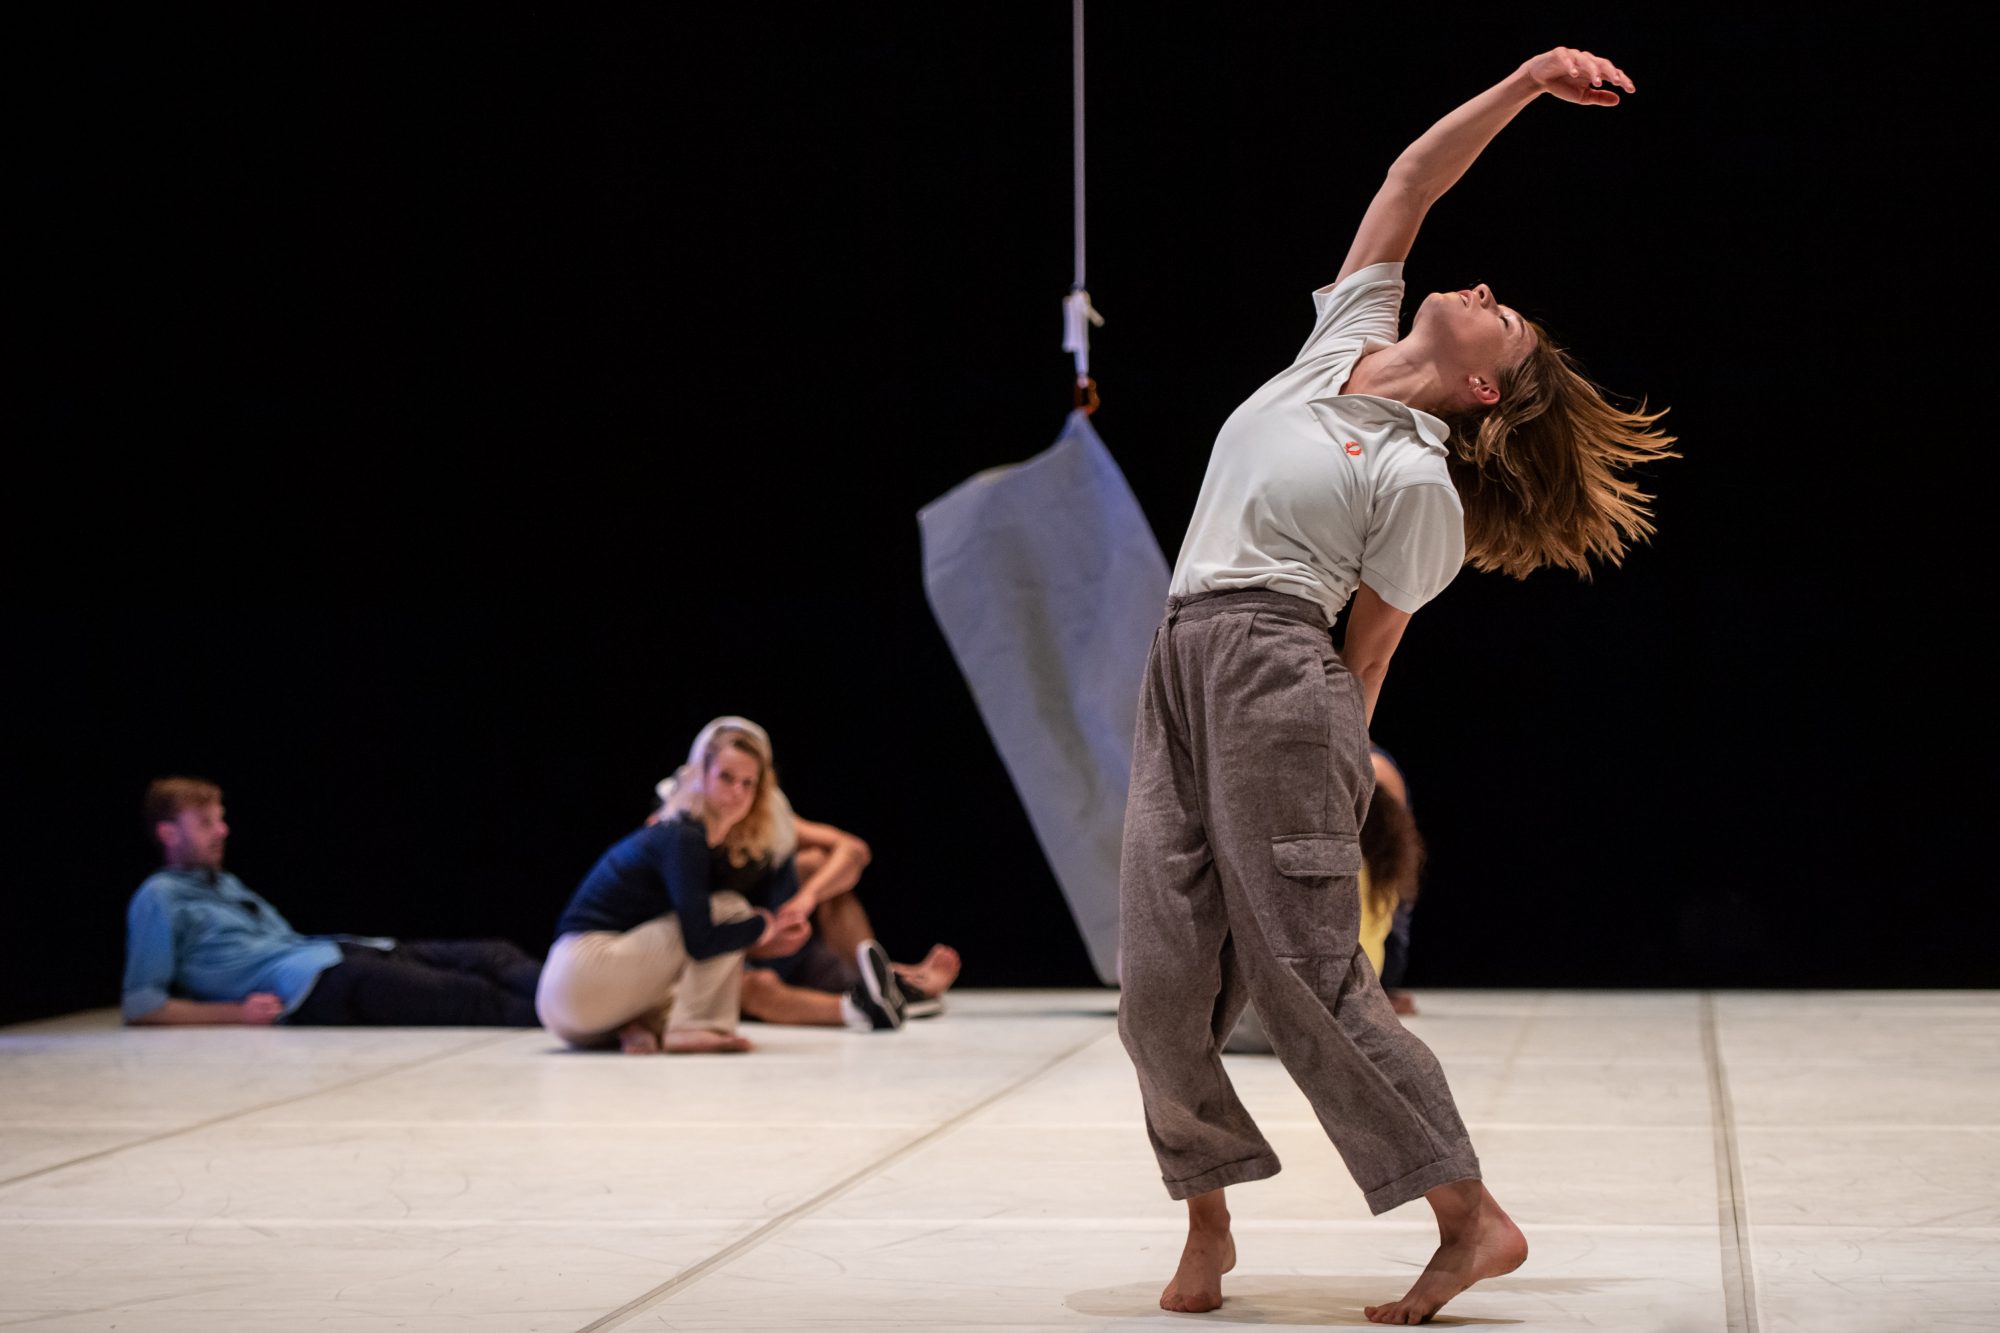 Candoco perform Hot Mess, choreographed by Theo Clinkard performed at Laban Theatre, London, UK, 25th July 2019